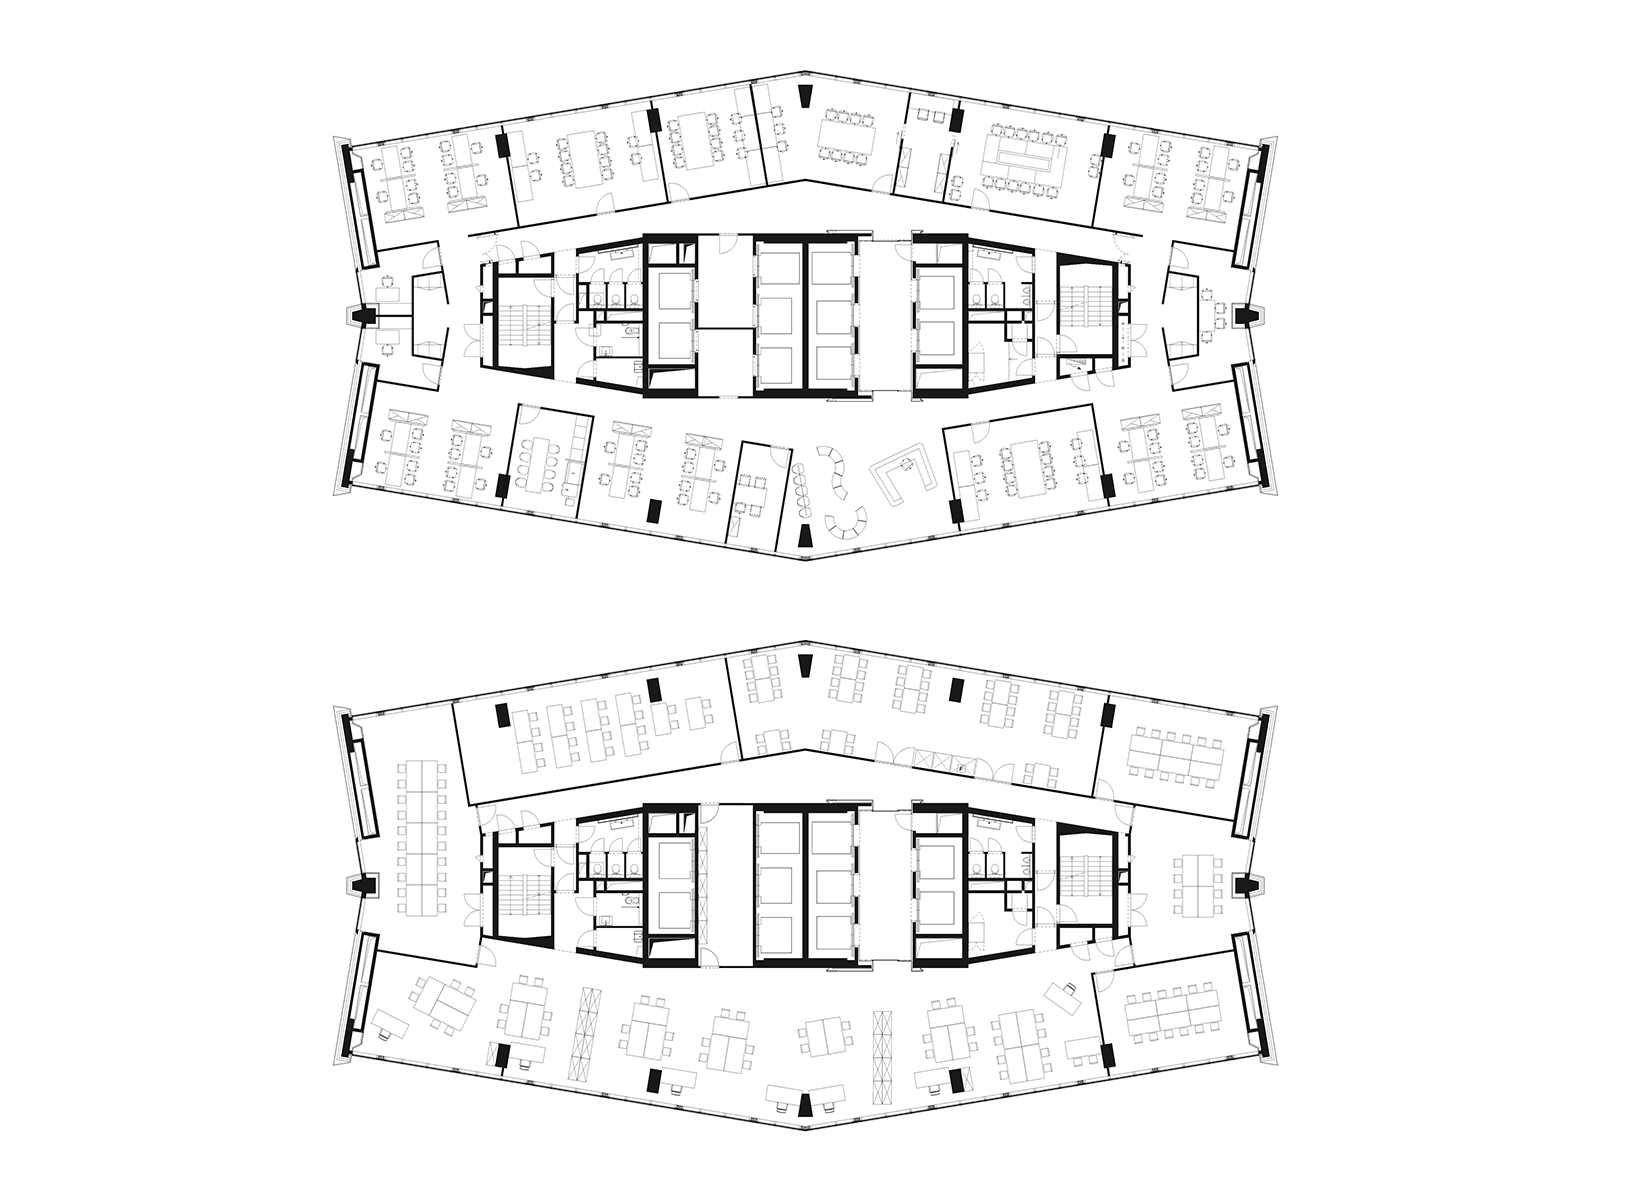 Typical Floor Layouts